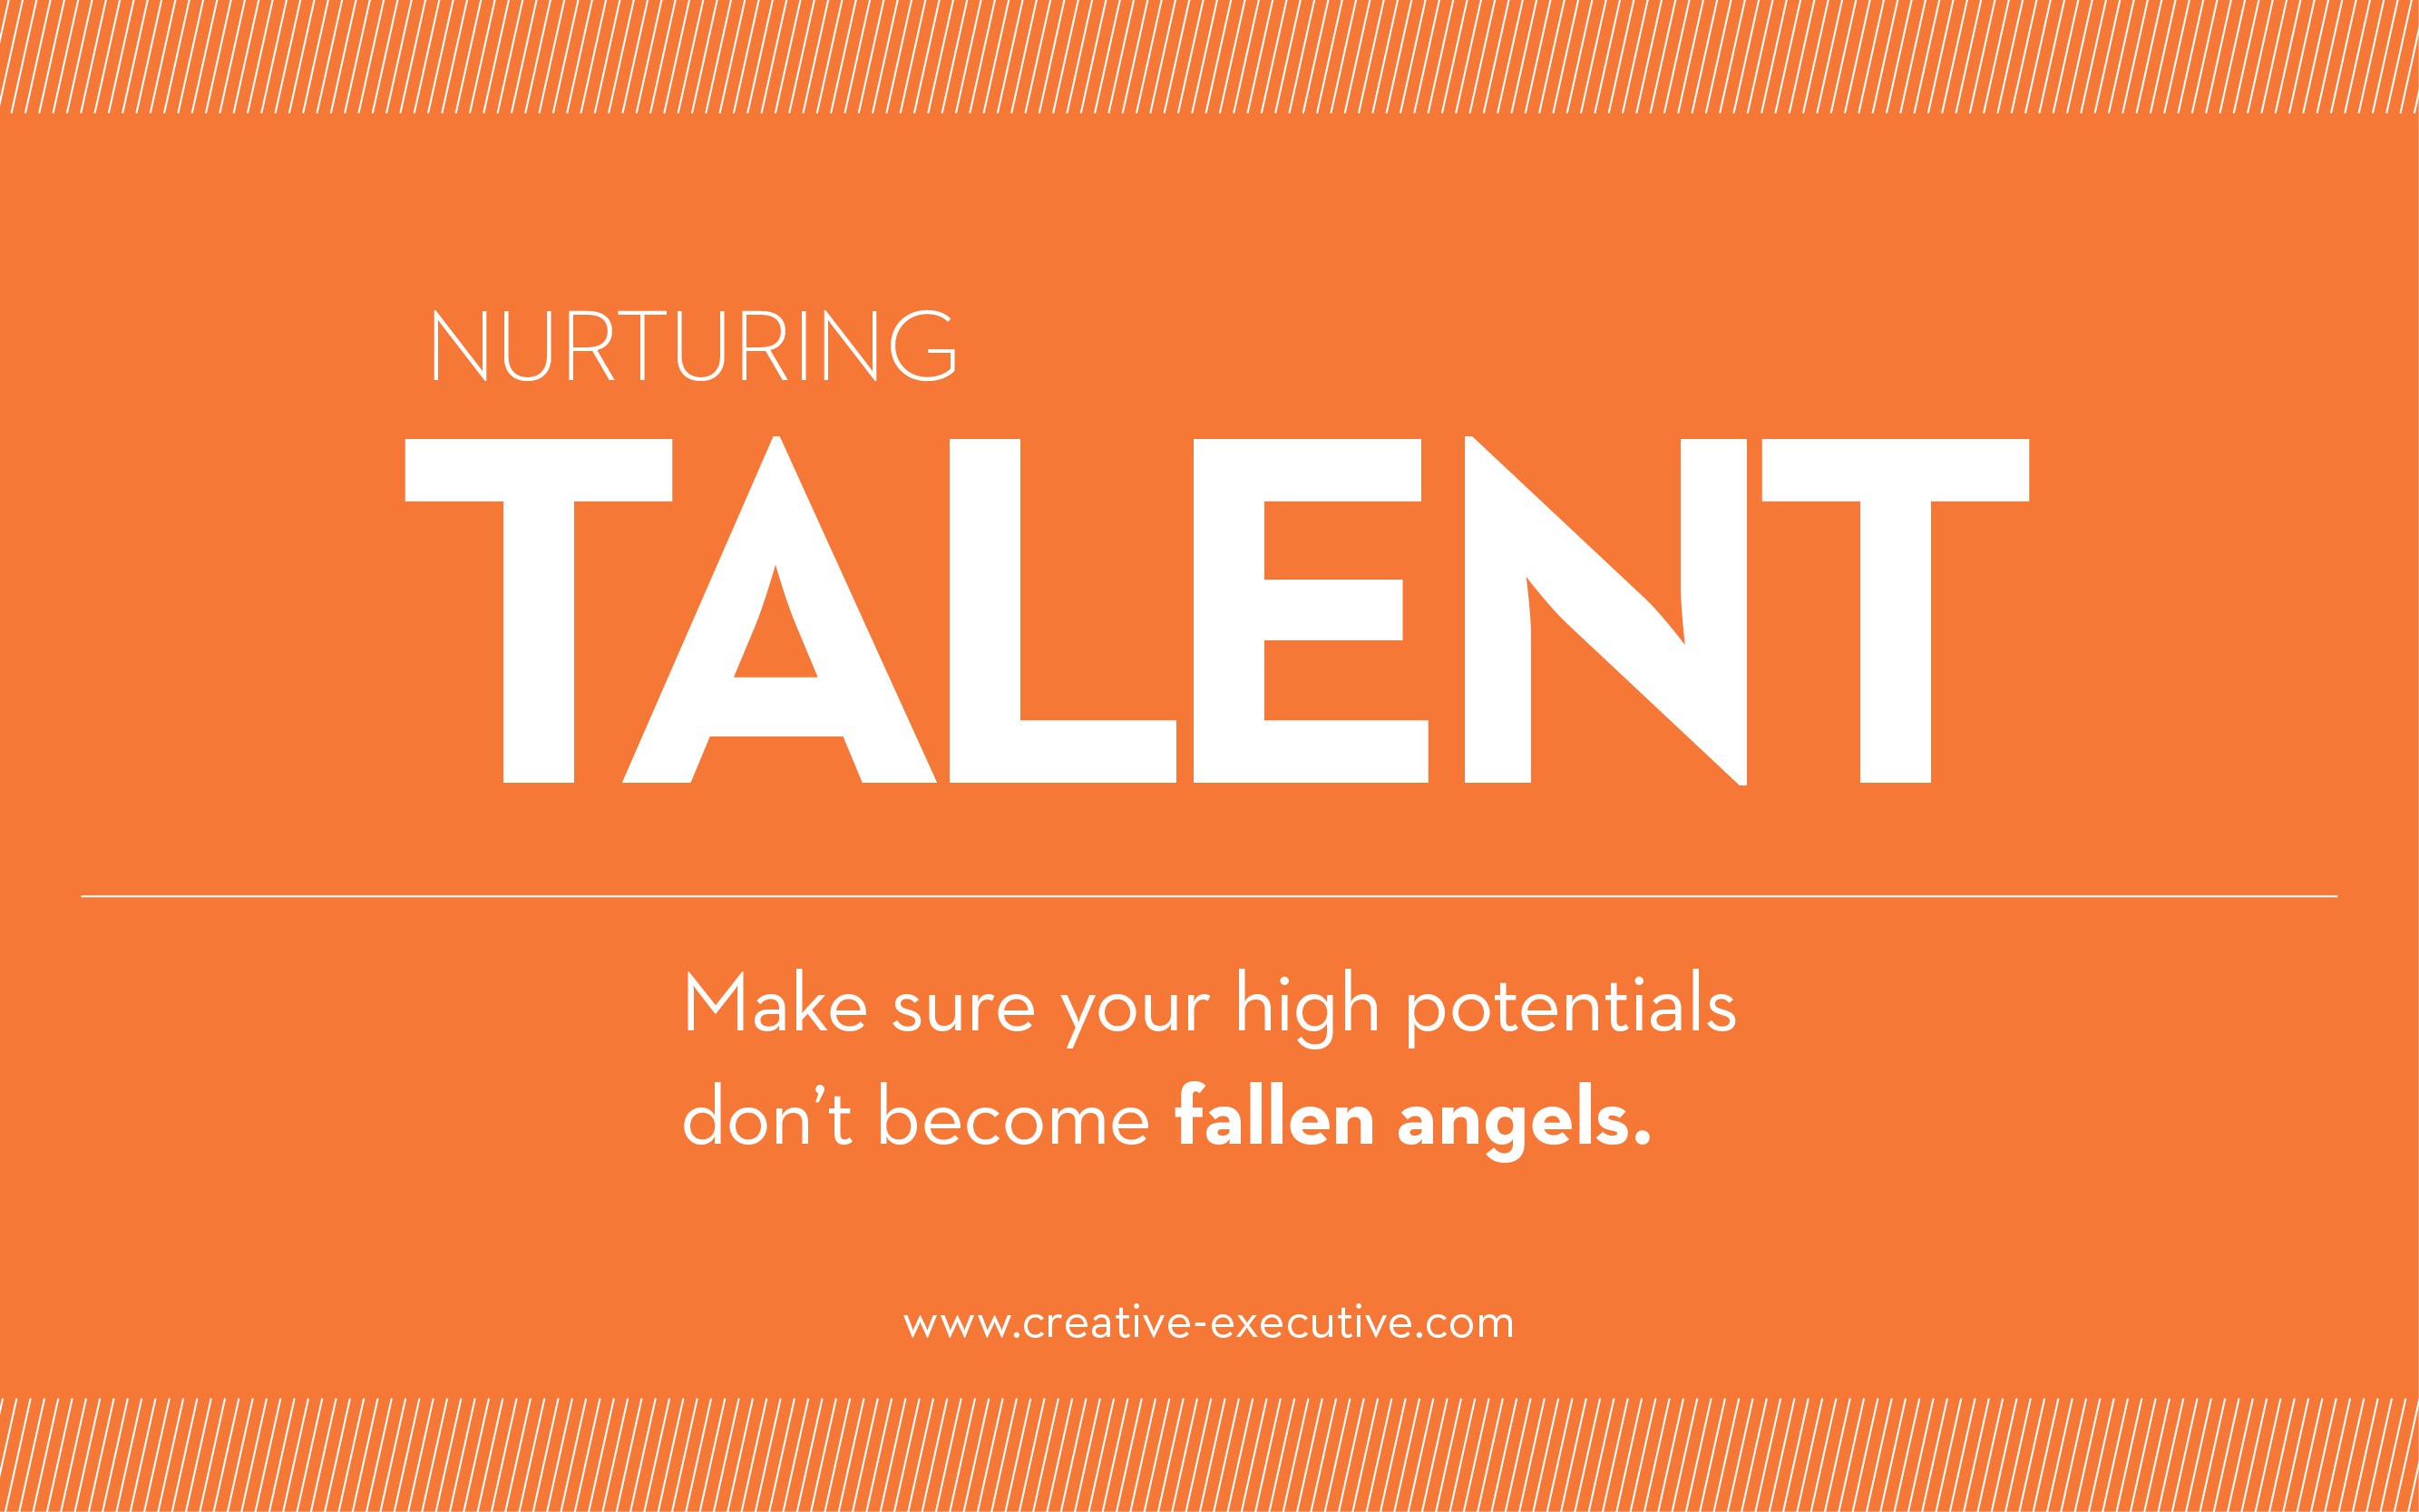 Nurturing Talent - Make sure your high potentials don't become fallen angels